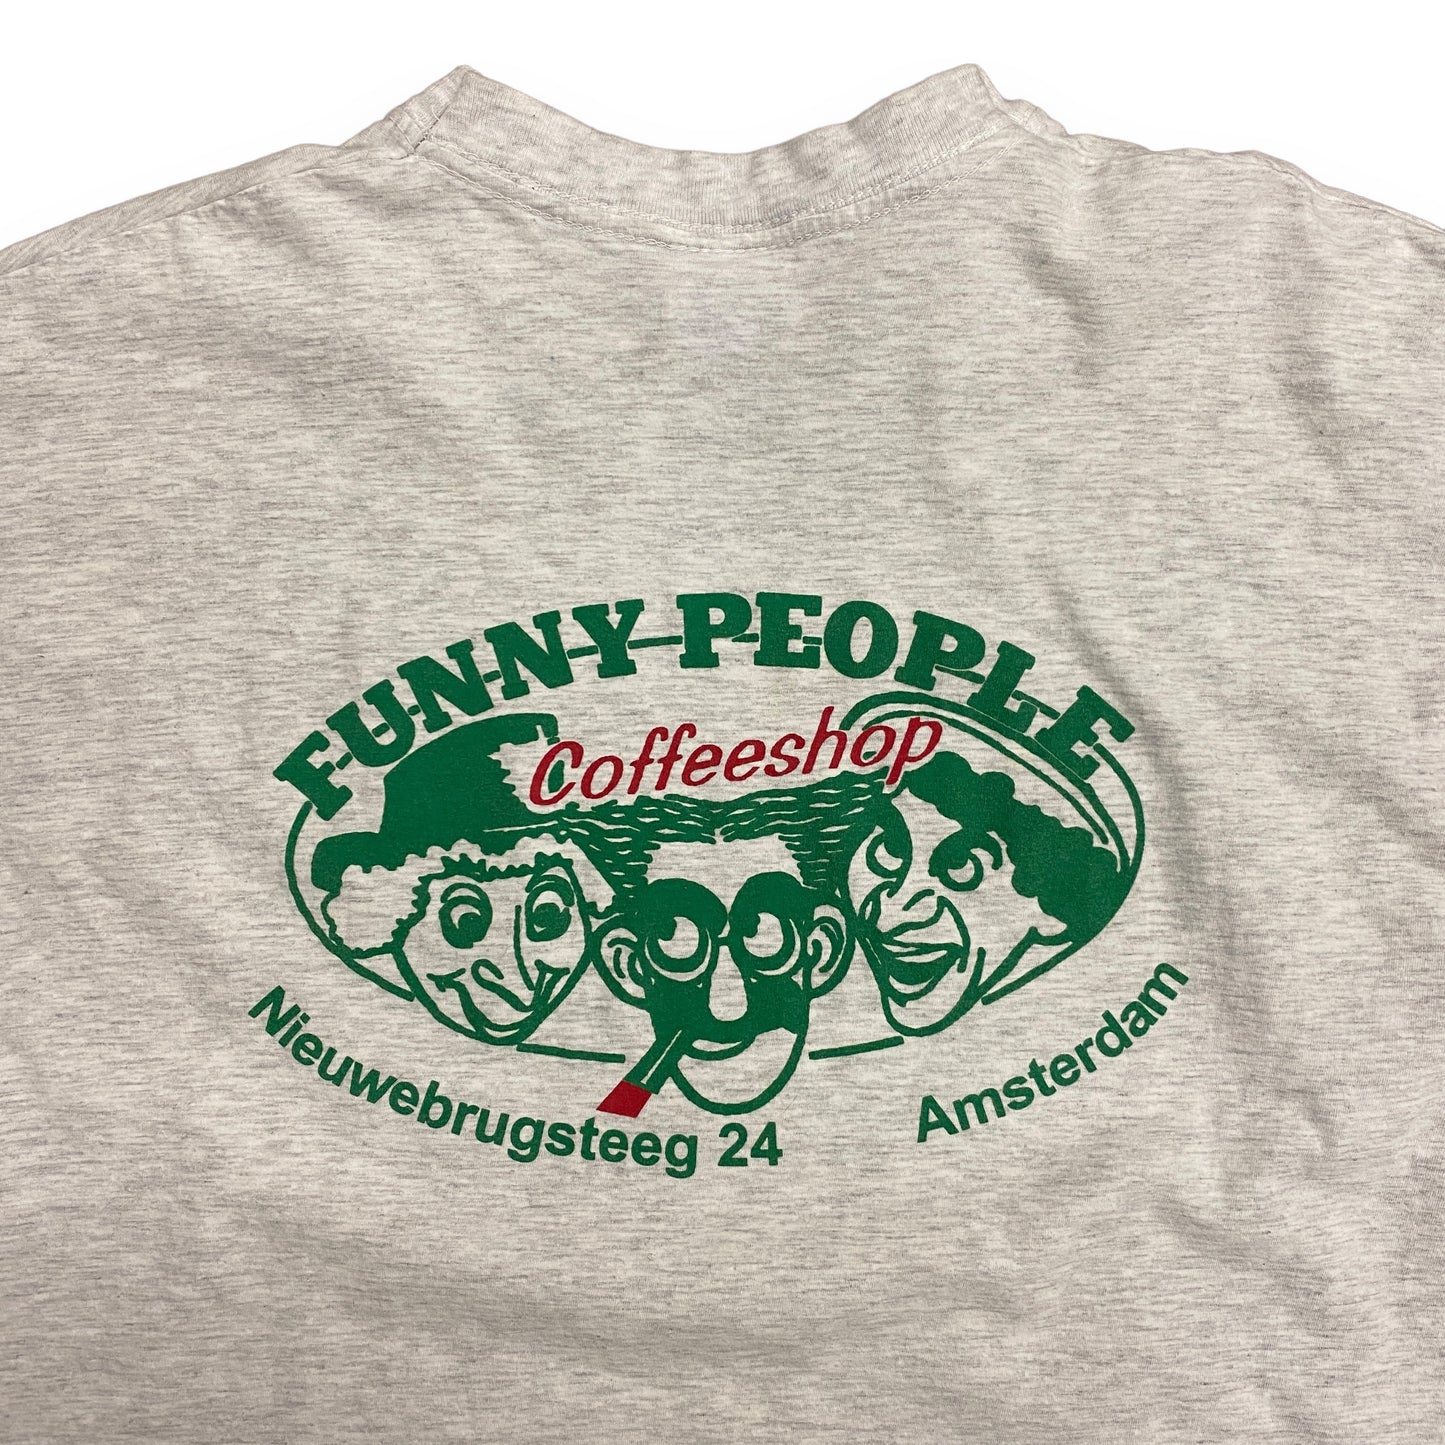 Vintage 1990s "Funny People Coffeeshop" Amsterdam - Size Large